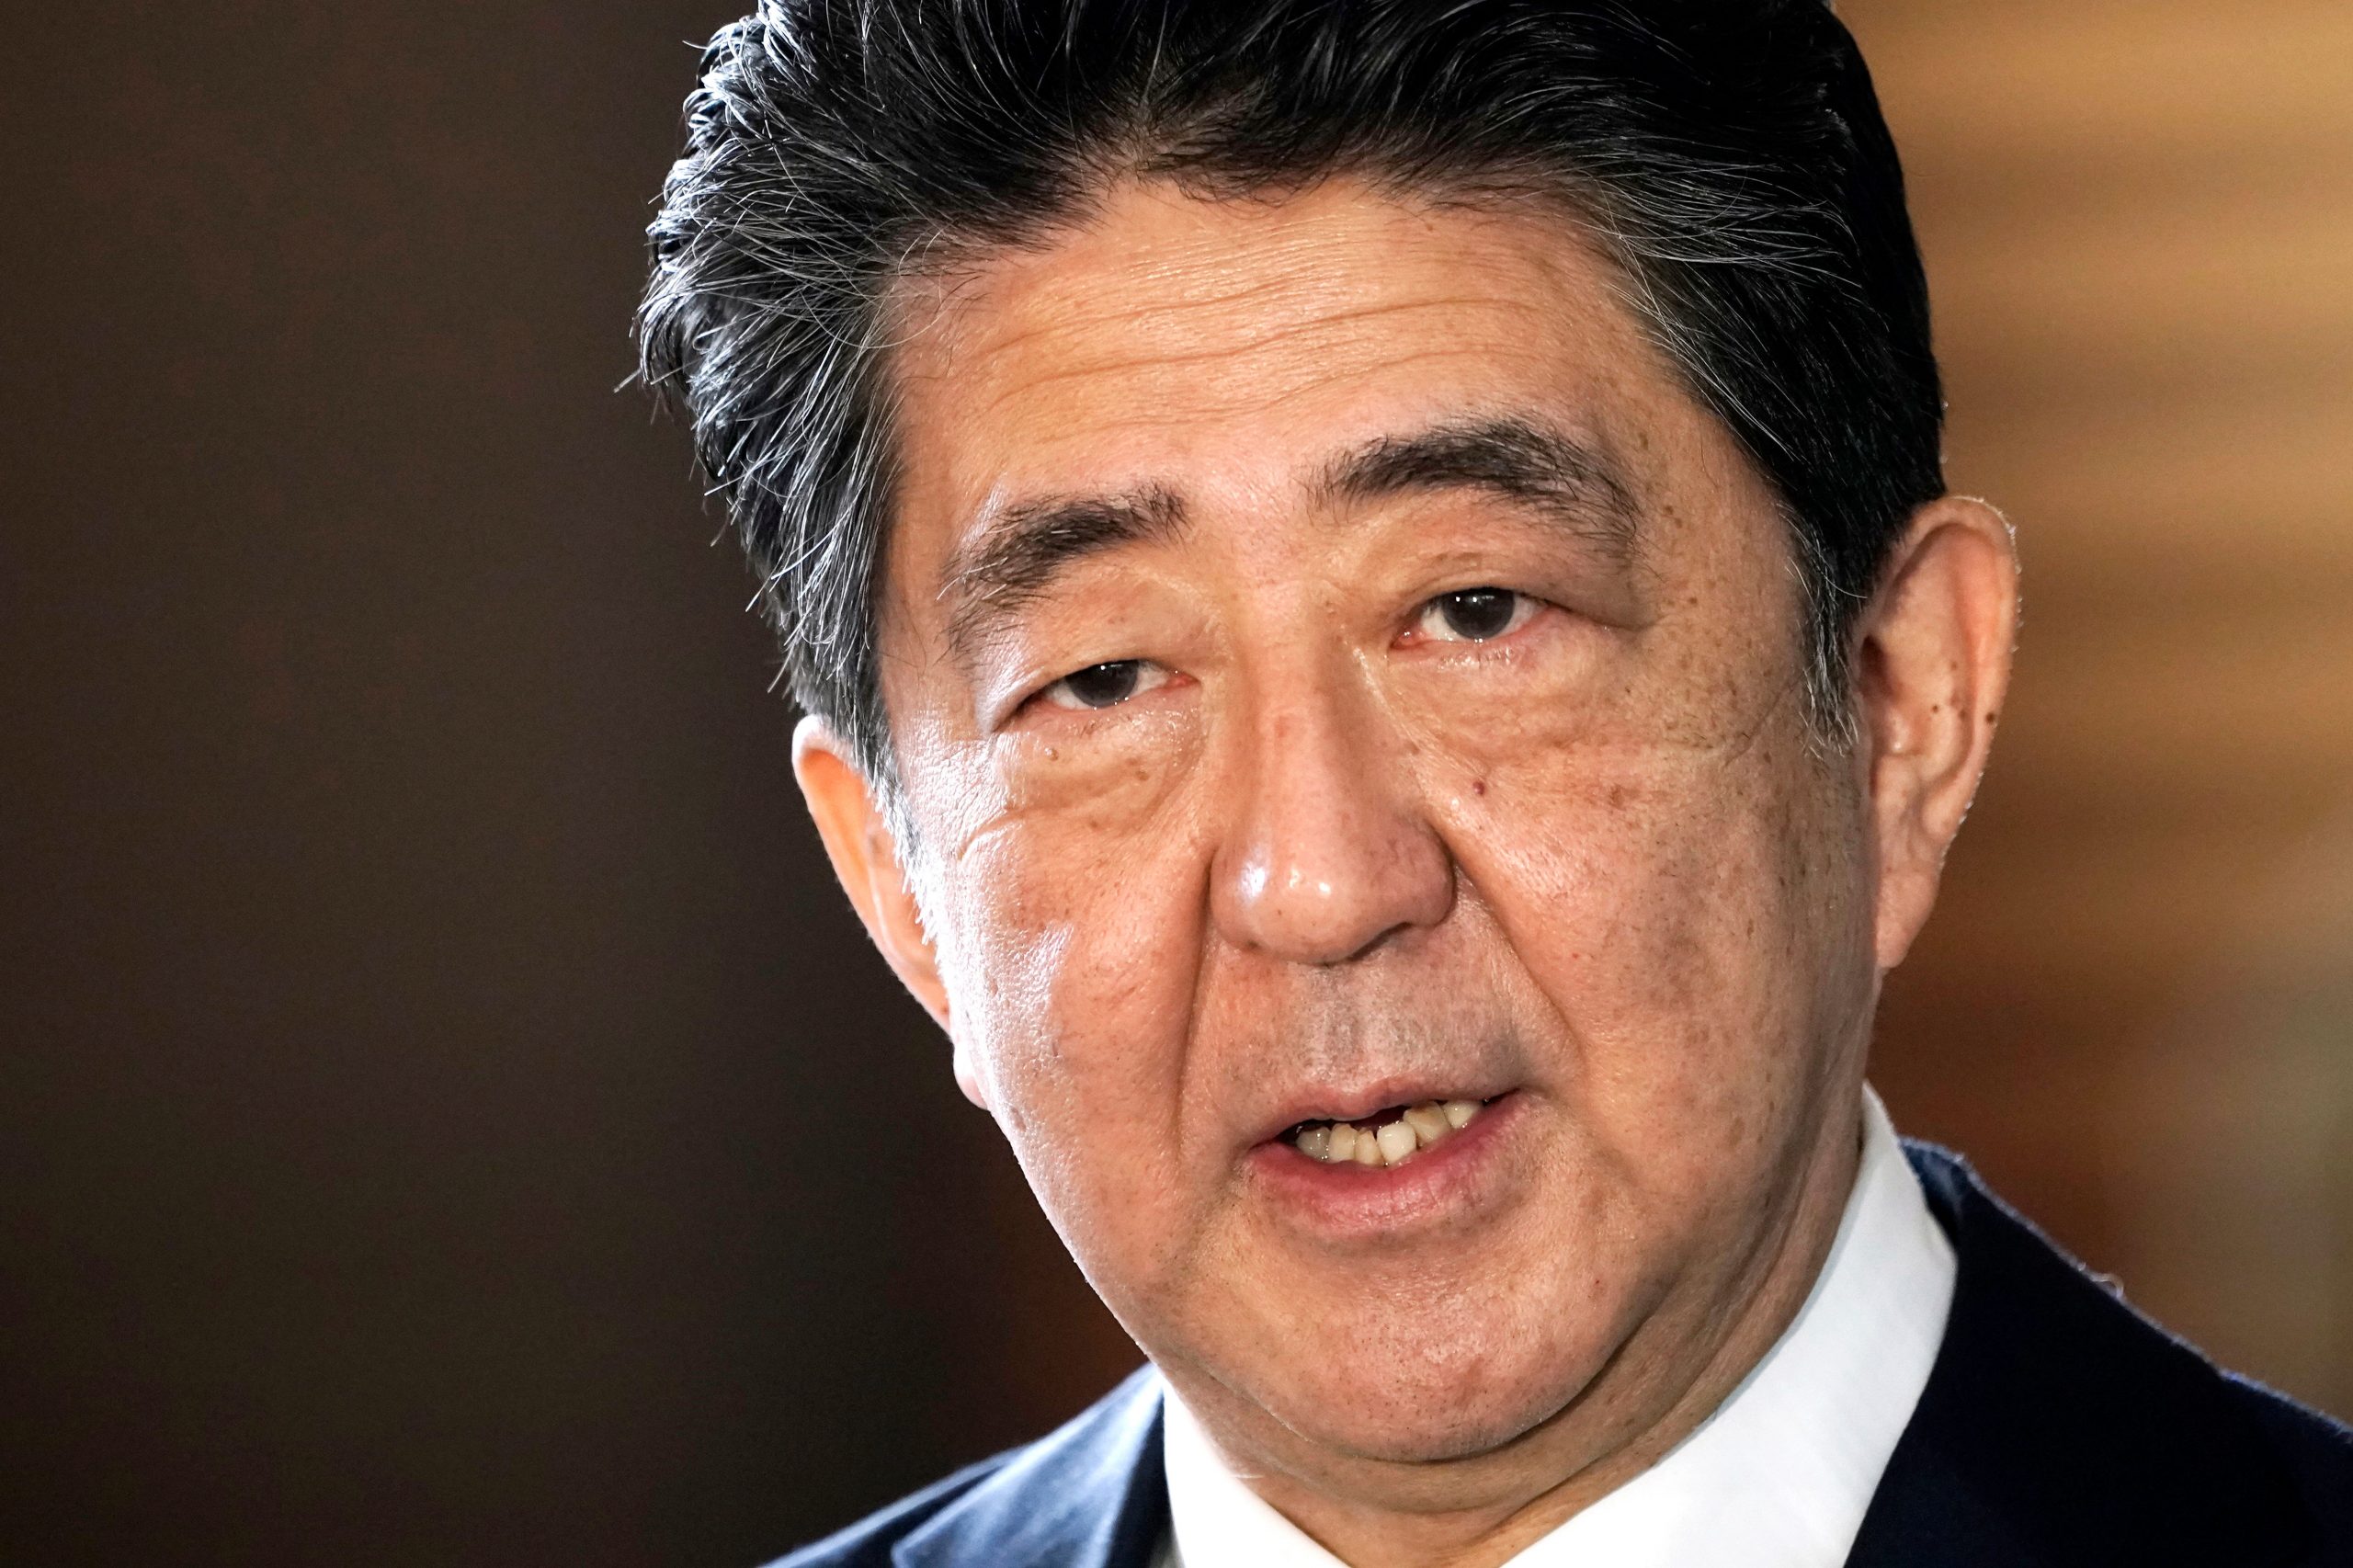 Japan’s former PM Shinzo Abe dies after being shot: State media